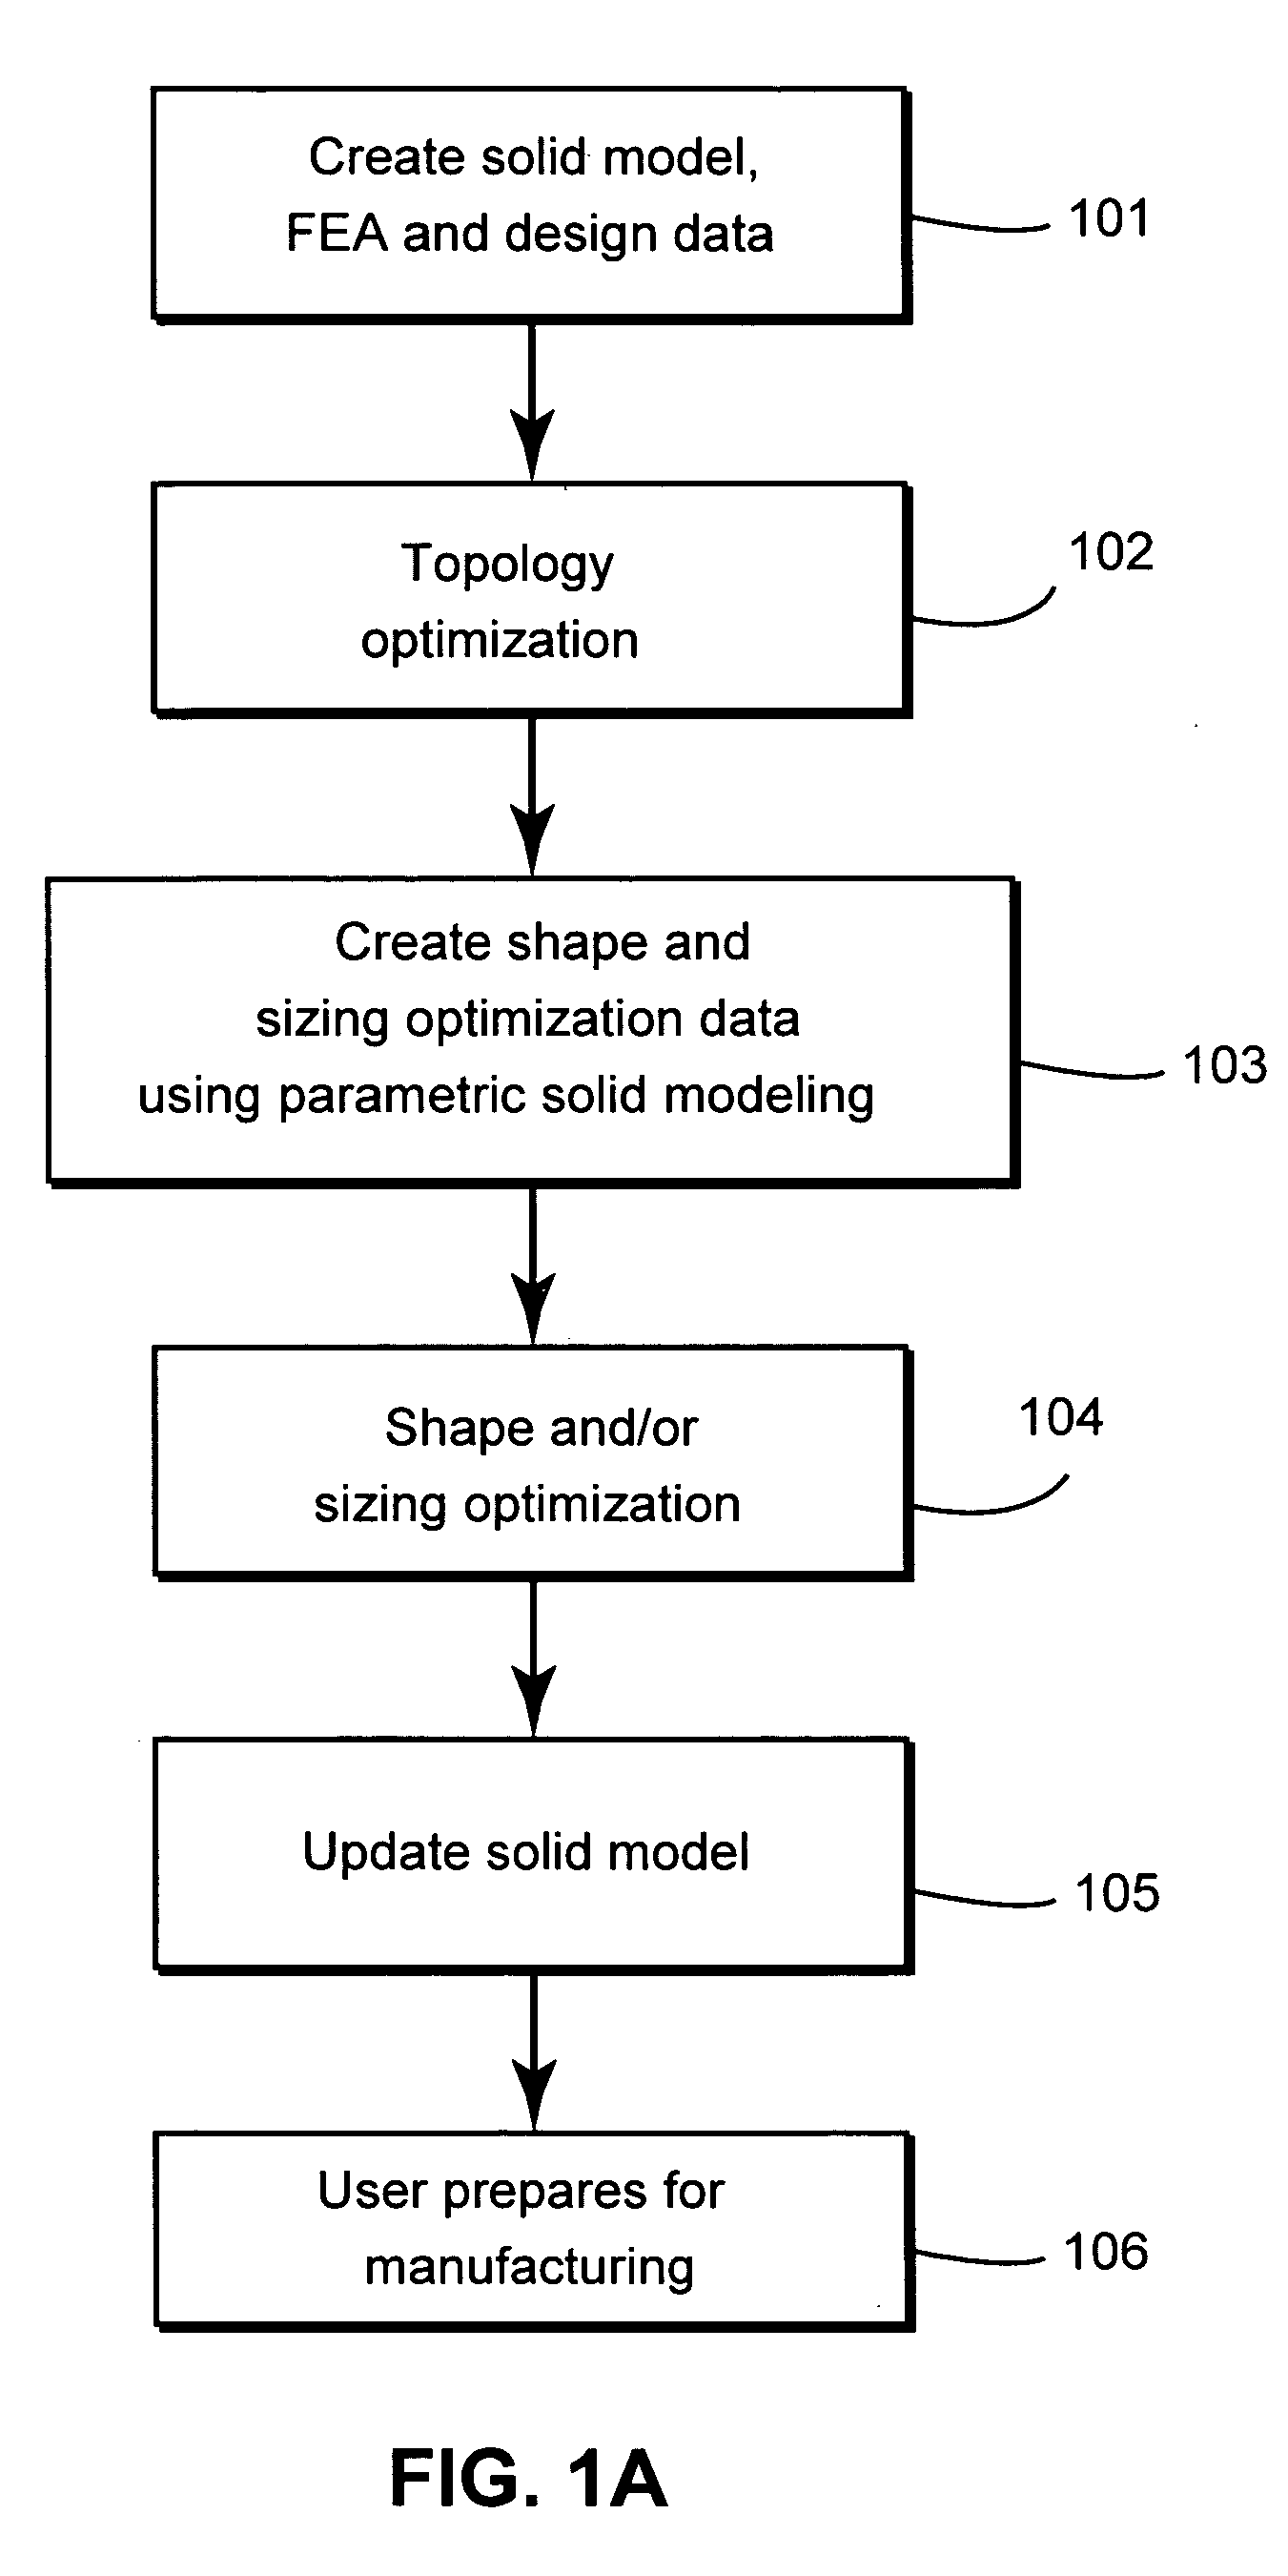 Parametrized material and performance properties based on virtual testing